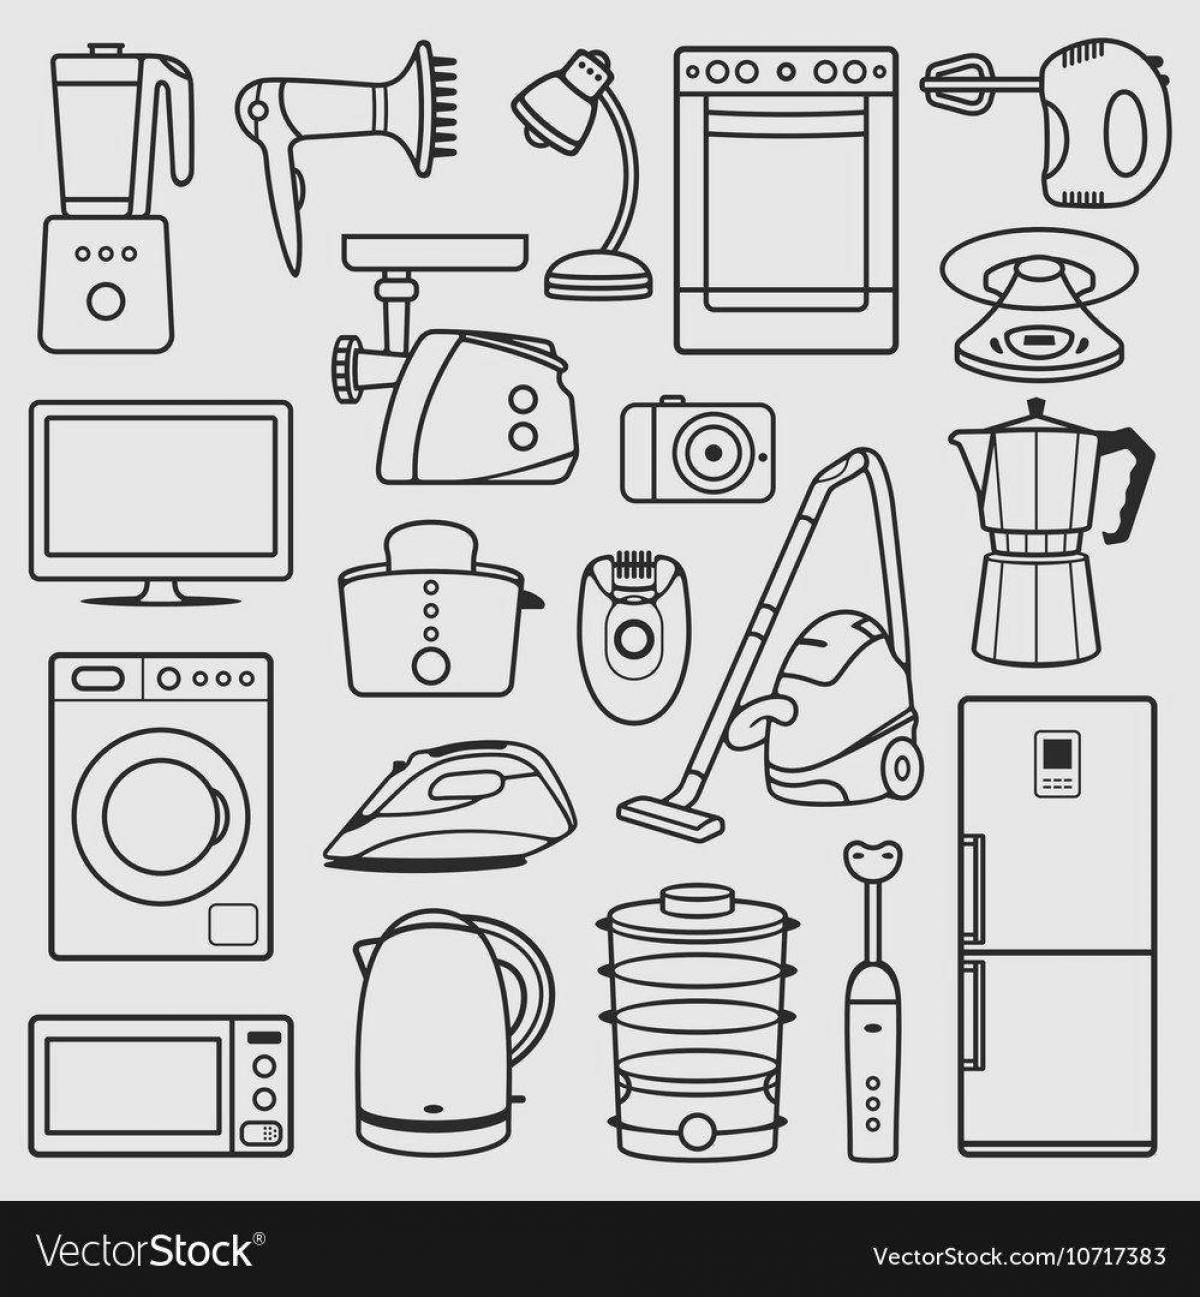 Colourful coloring of household appliances for children 4-5 years old